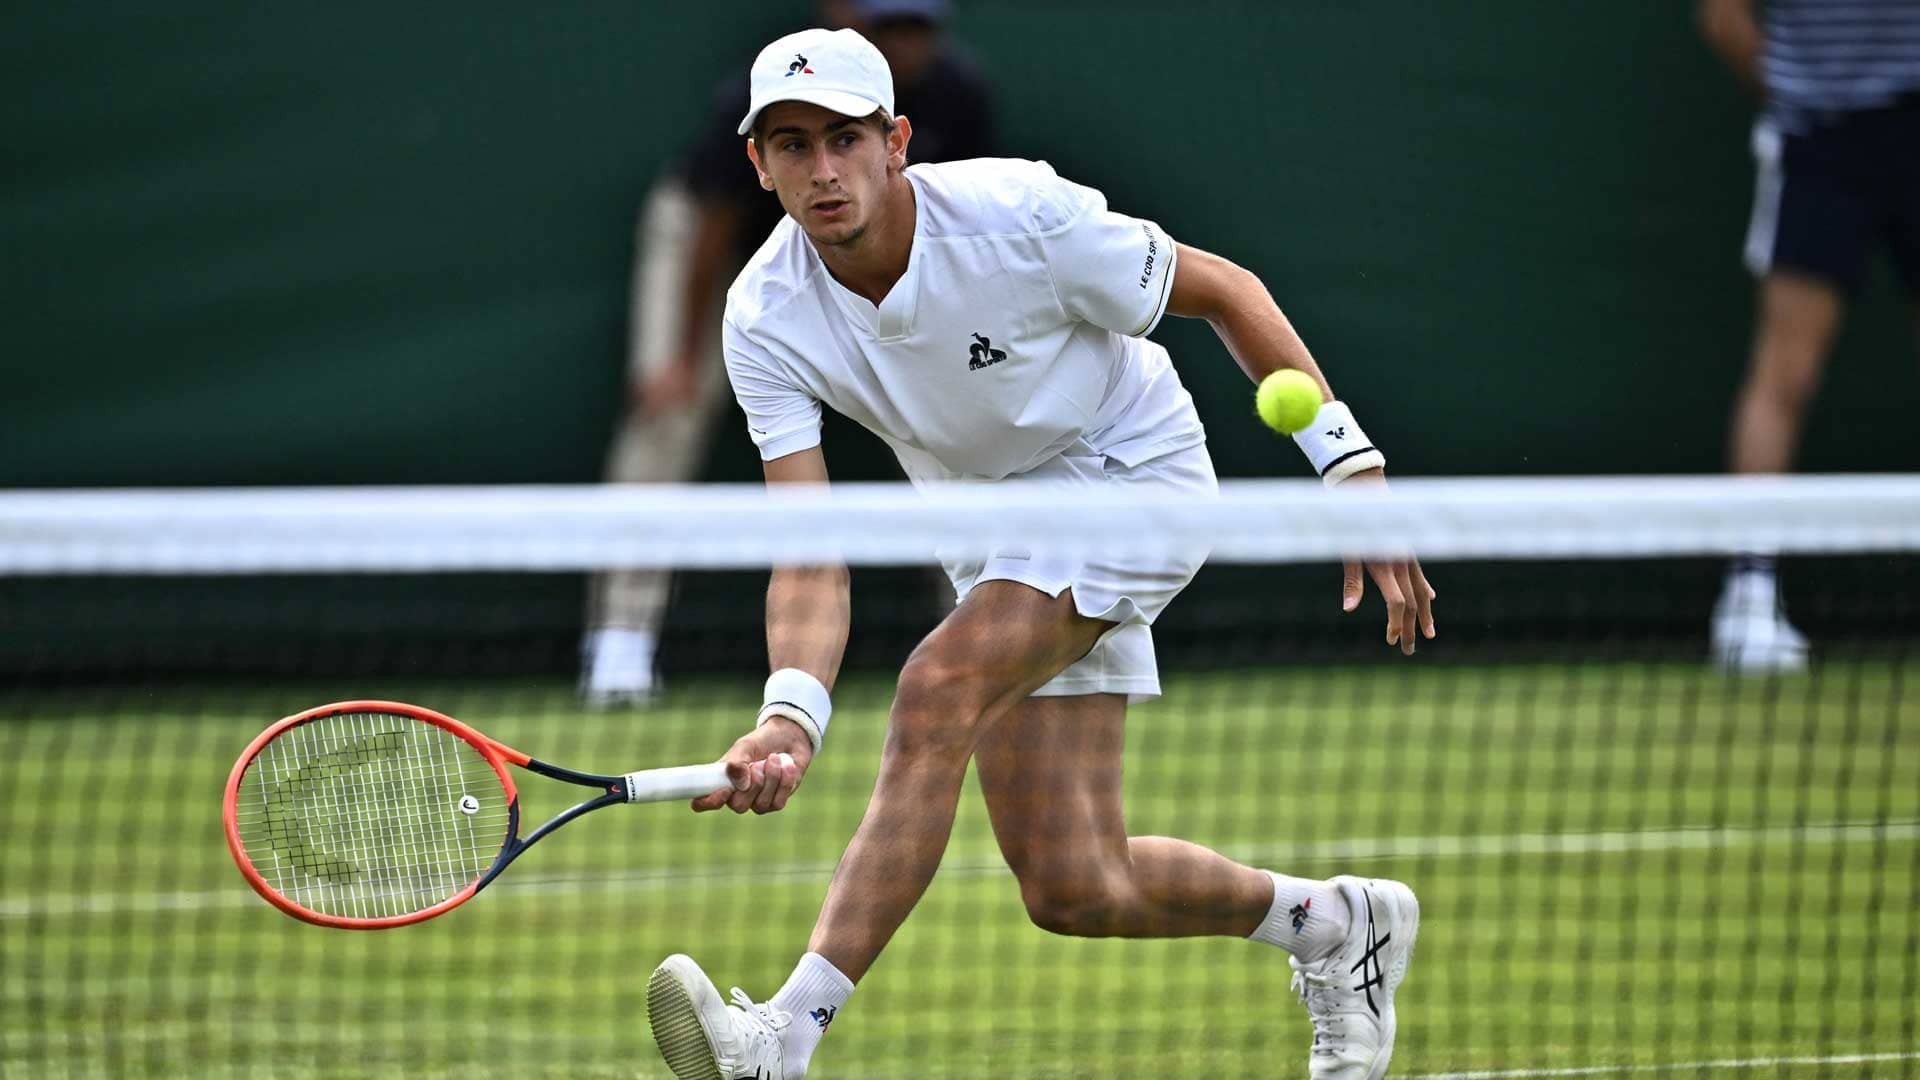 Italy's Matteo Arnaldi notched three wins as the top seed in Wimbledon qualifying.